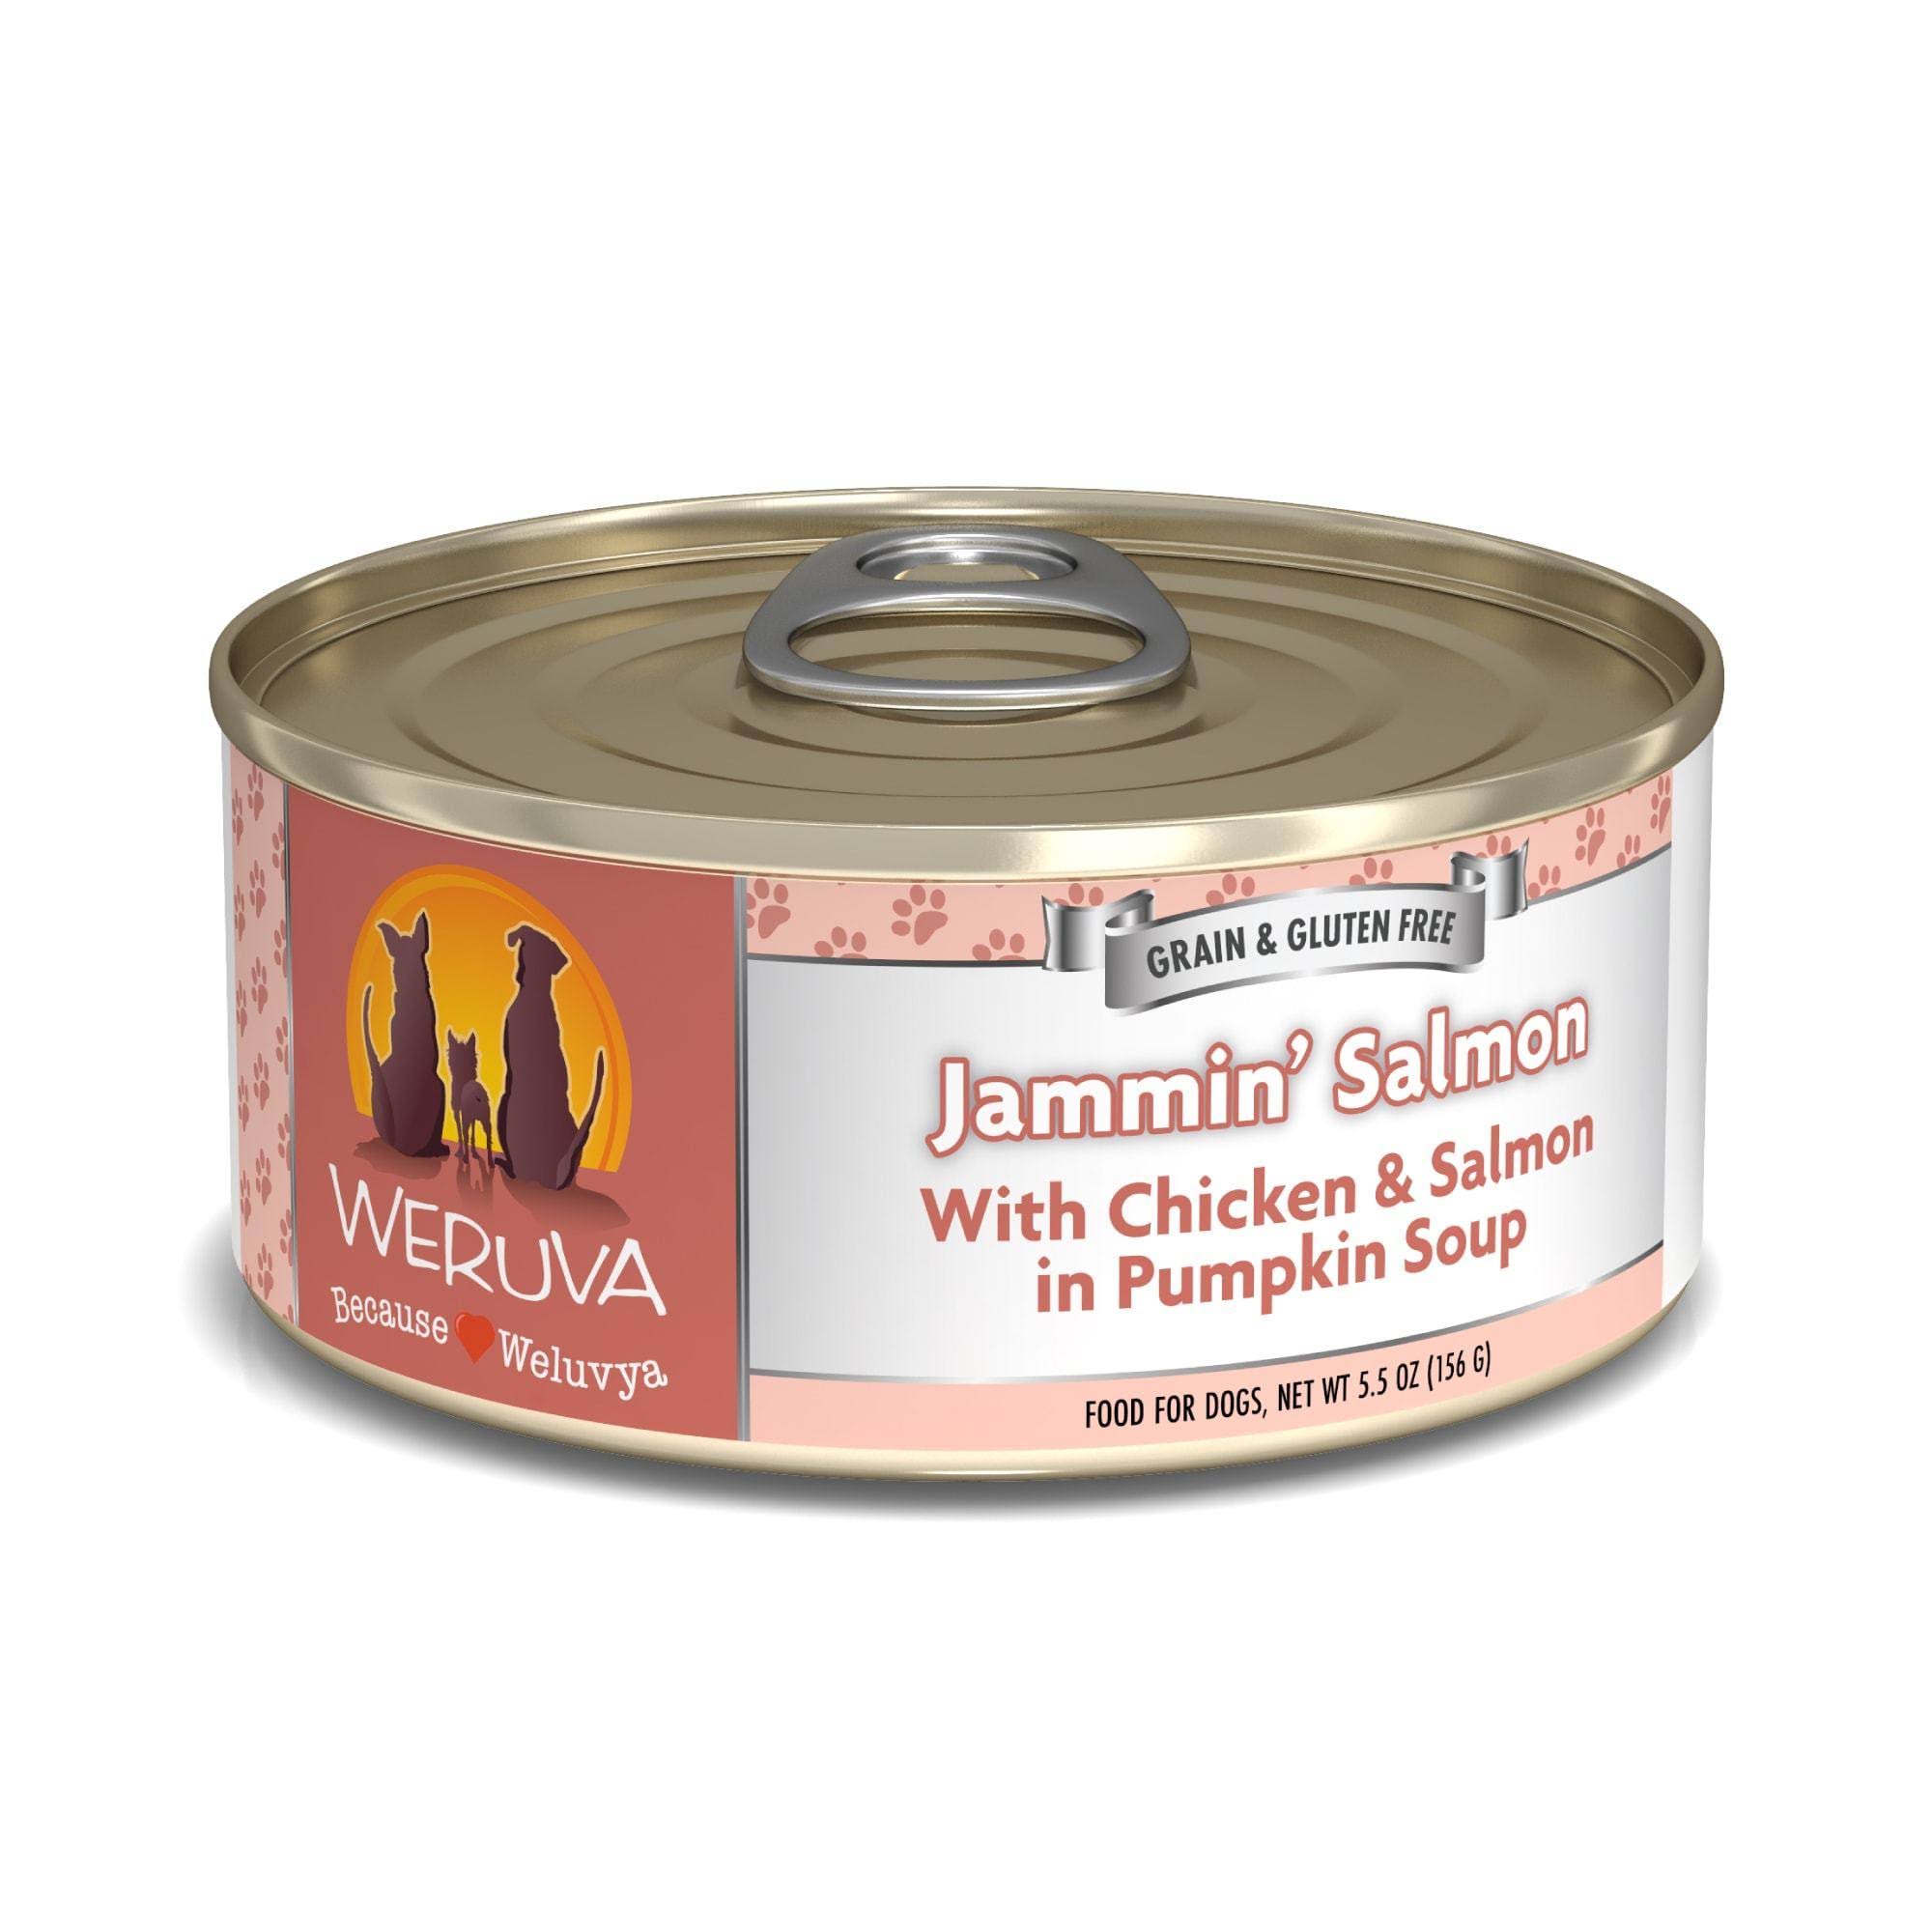 Weruva Jammin Salmon with Chicken & Salmon in Pumpkin Soup Canned Dog Food - 5.5 oz, Case of 24